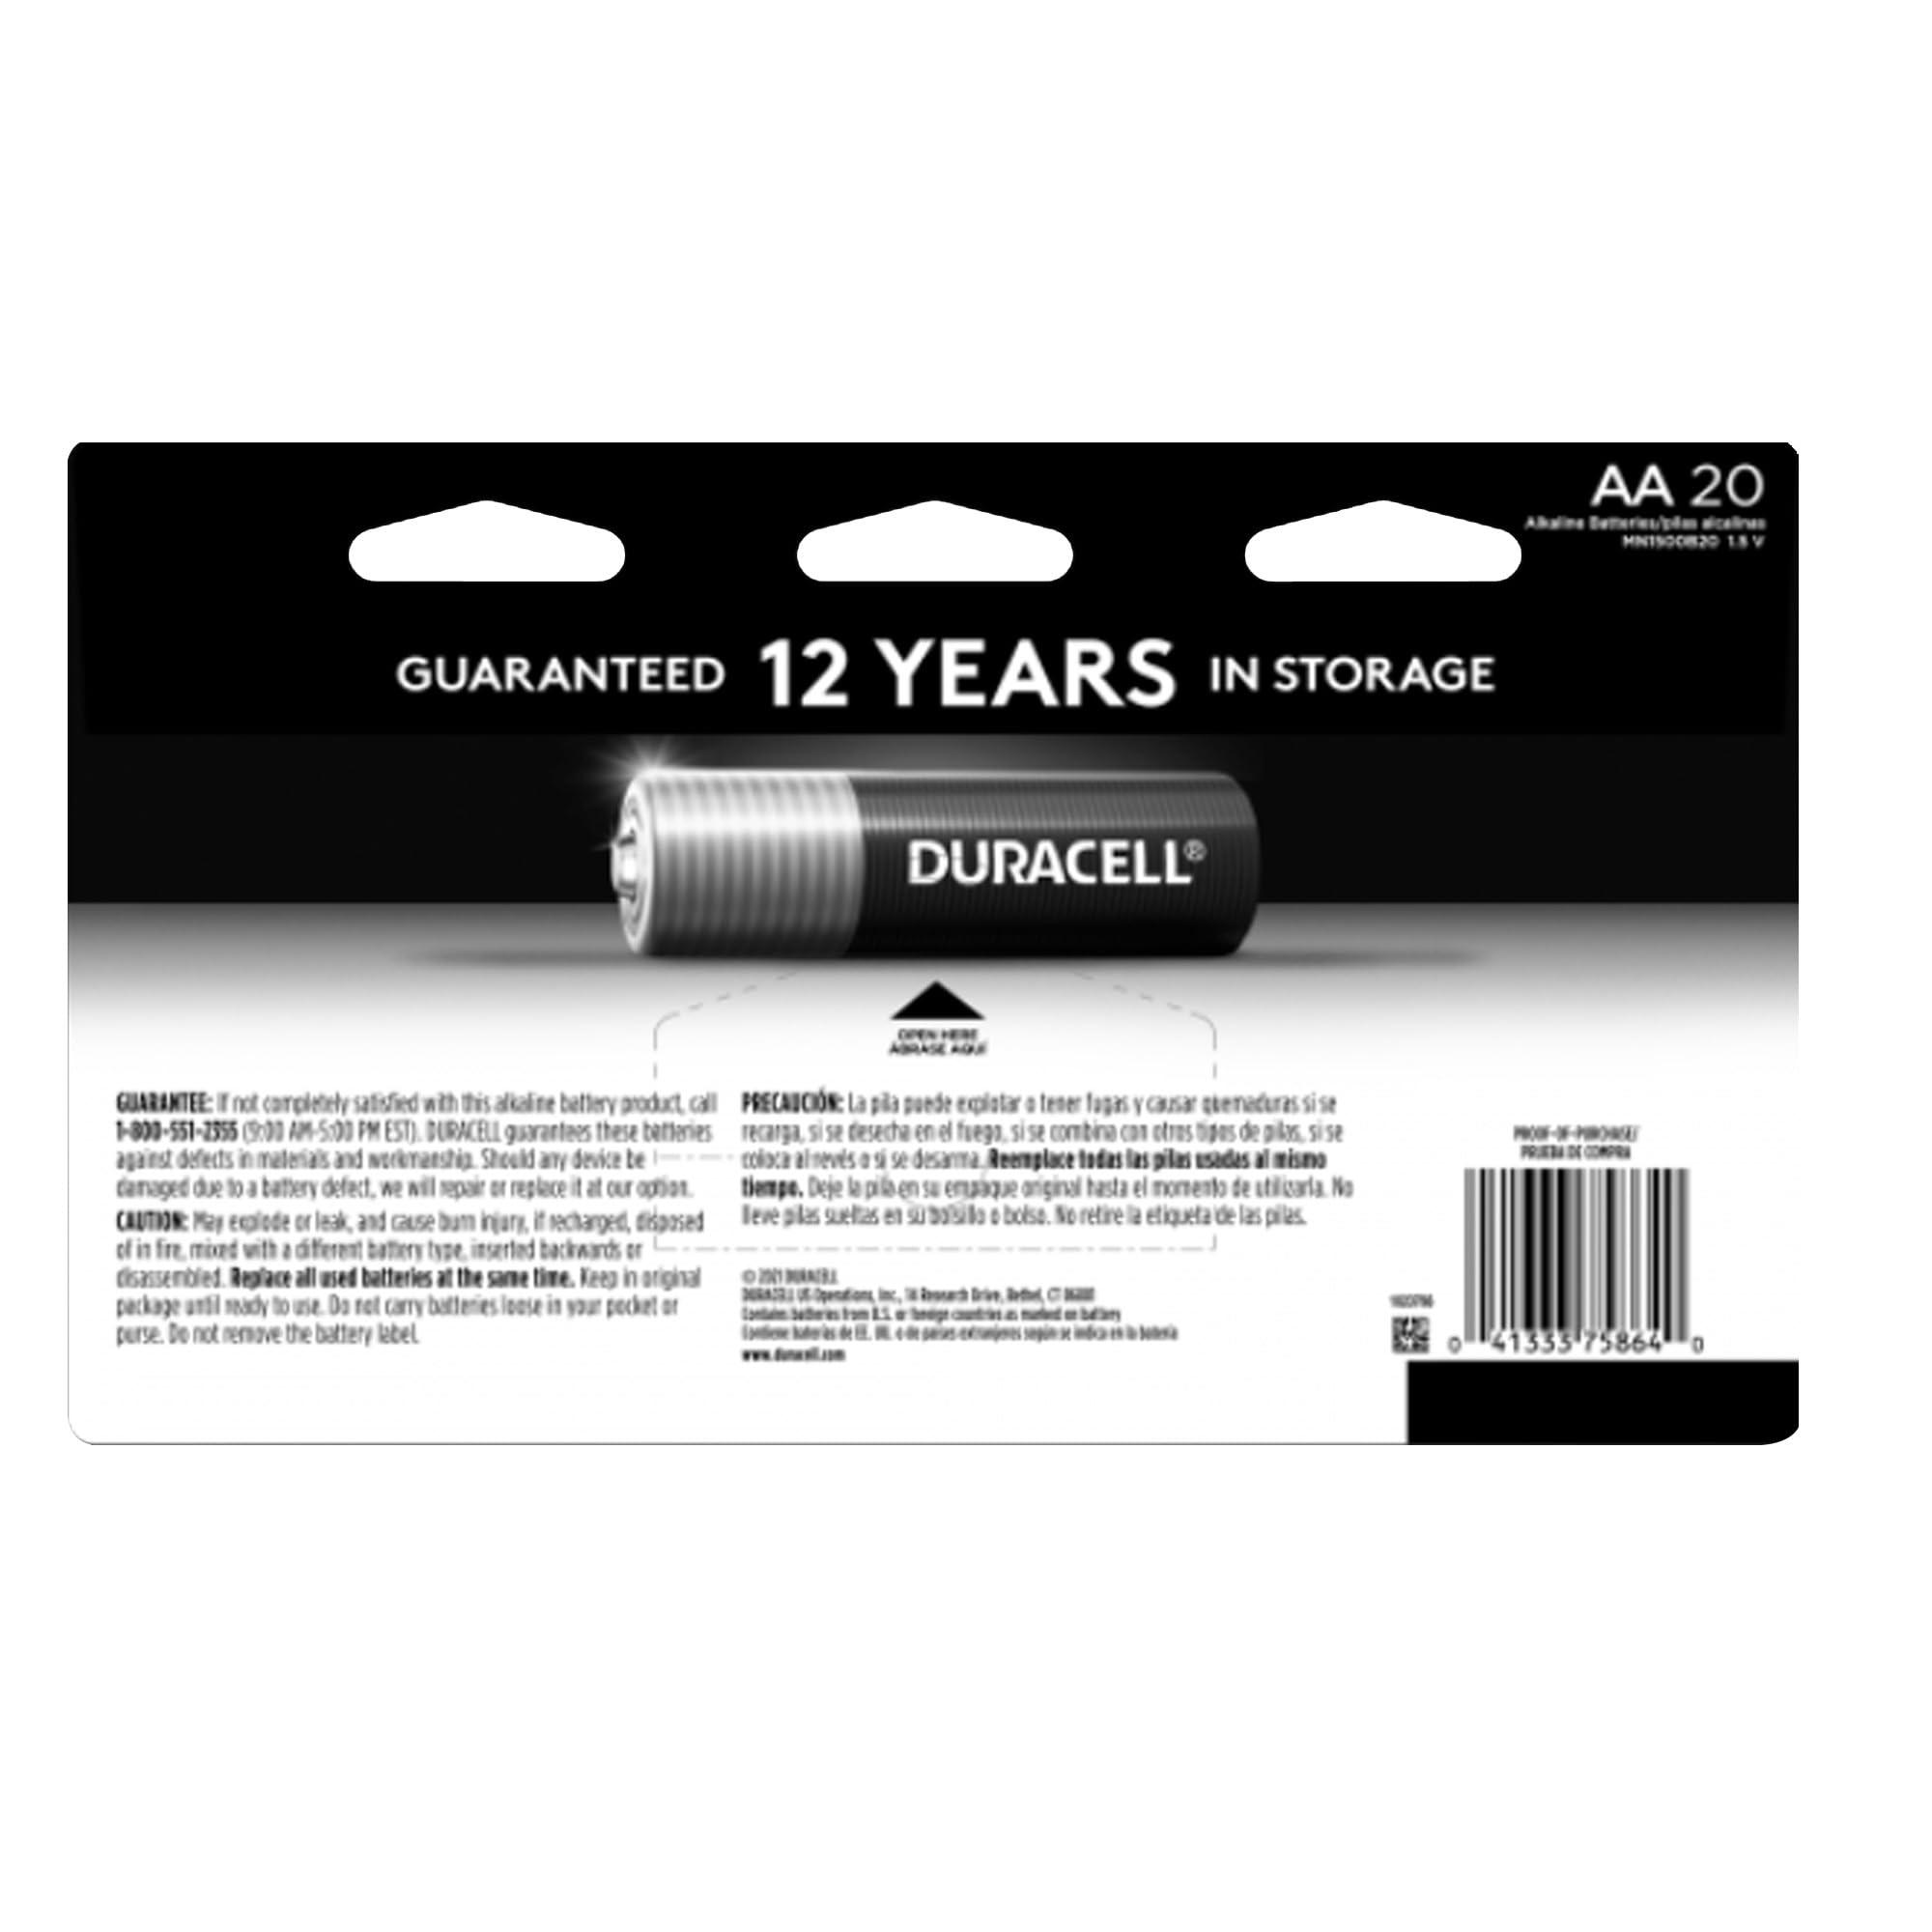 DURACELL Duralock AA 1.5-Volt Alkaline Batteries for Exclusive Power in Various Remotes, Controllers, and Calculators (240 Pack)